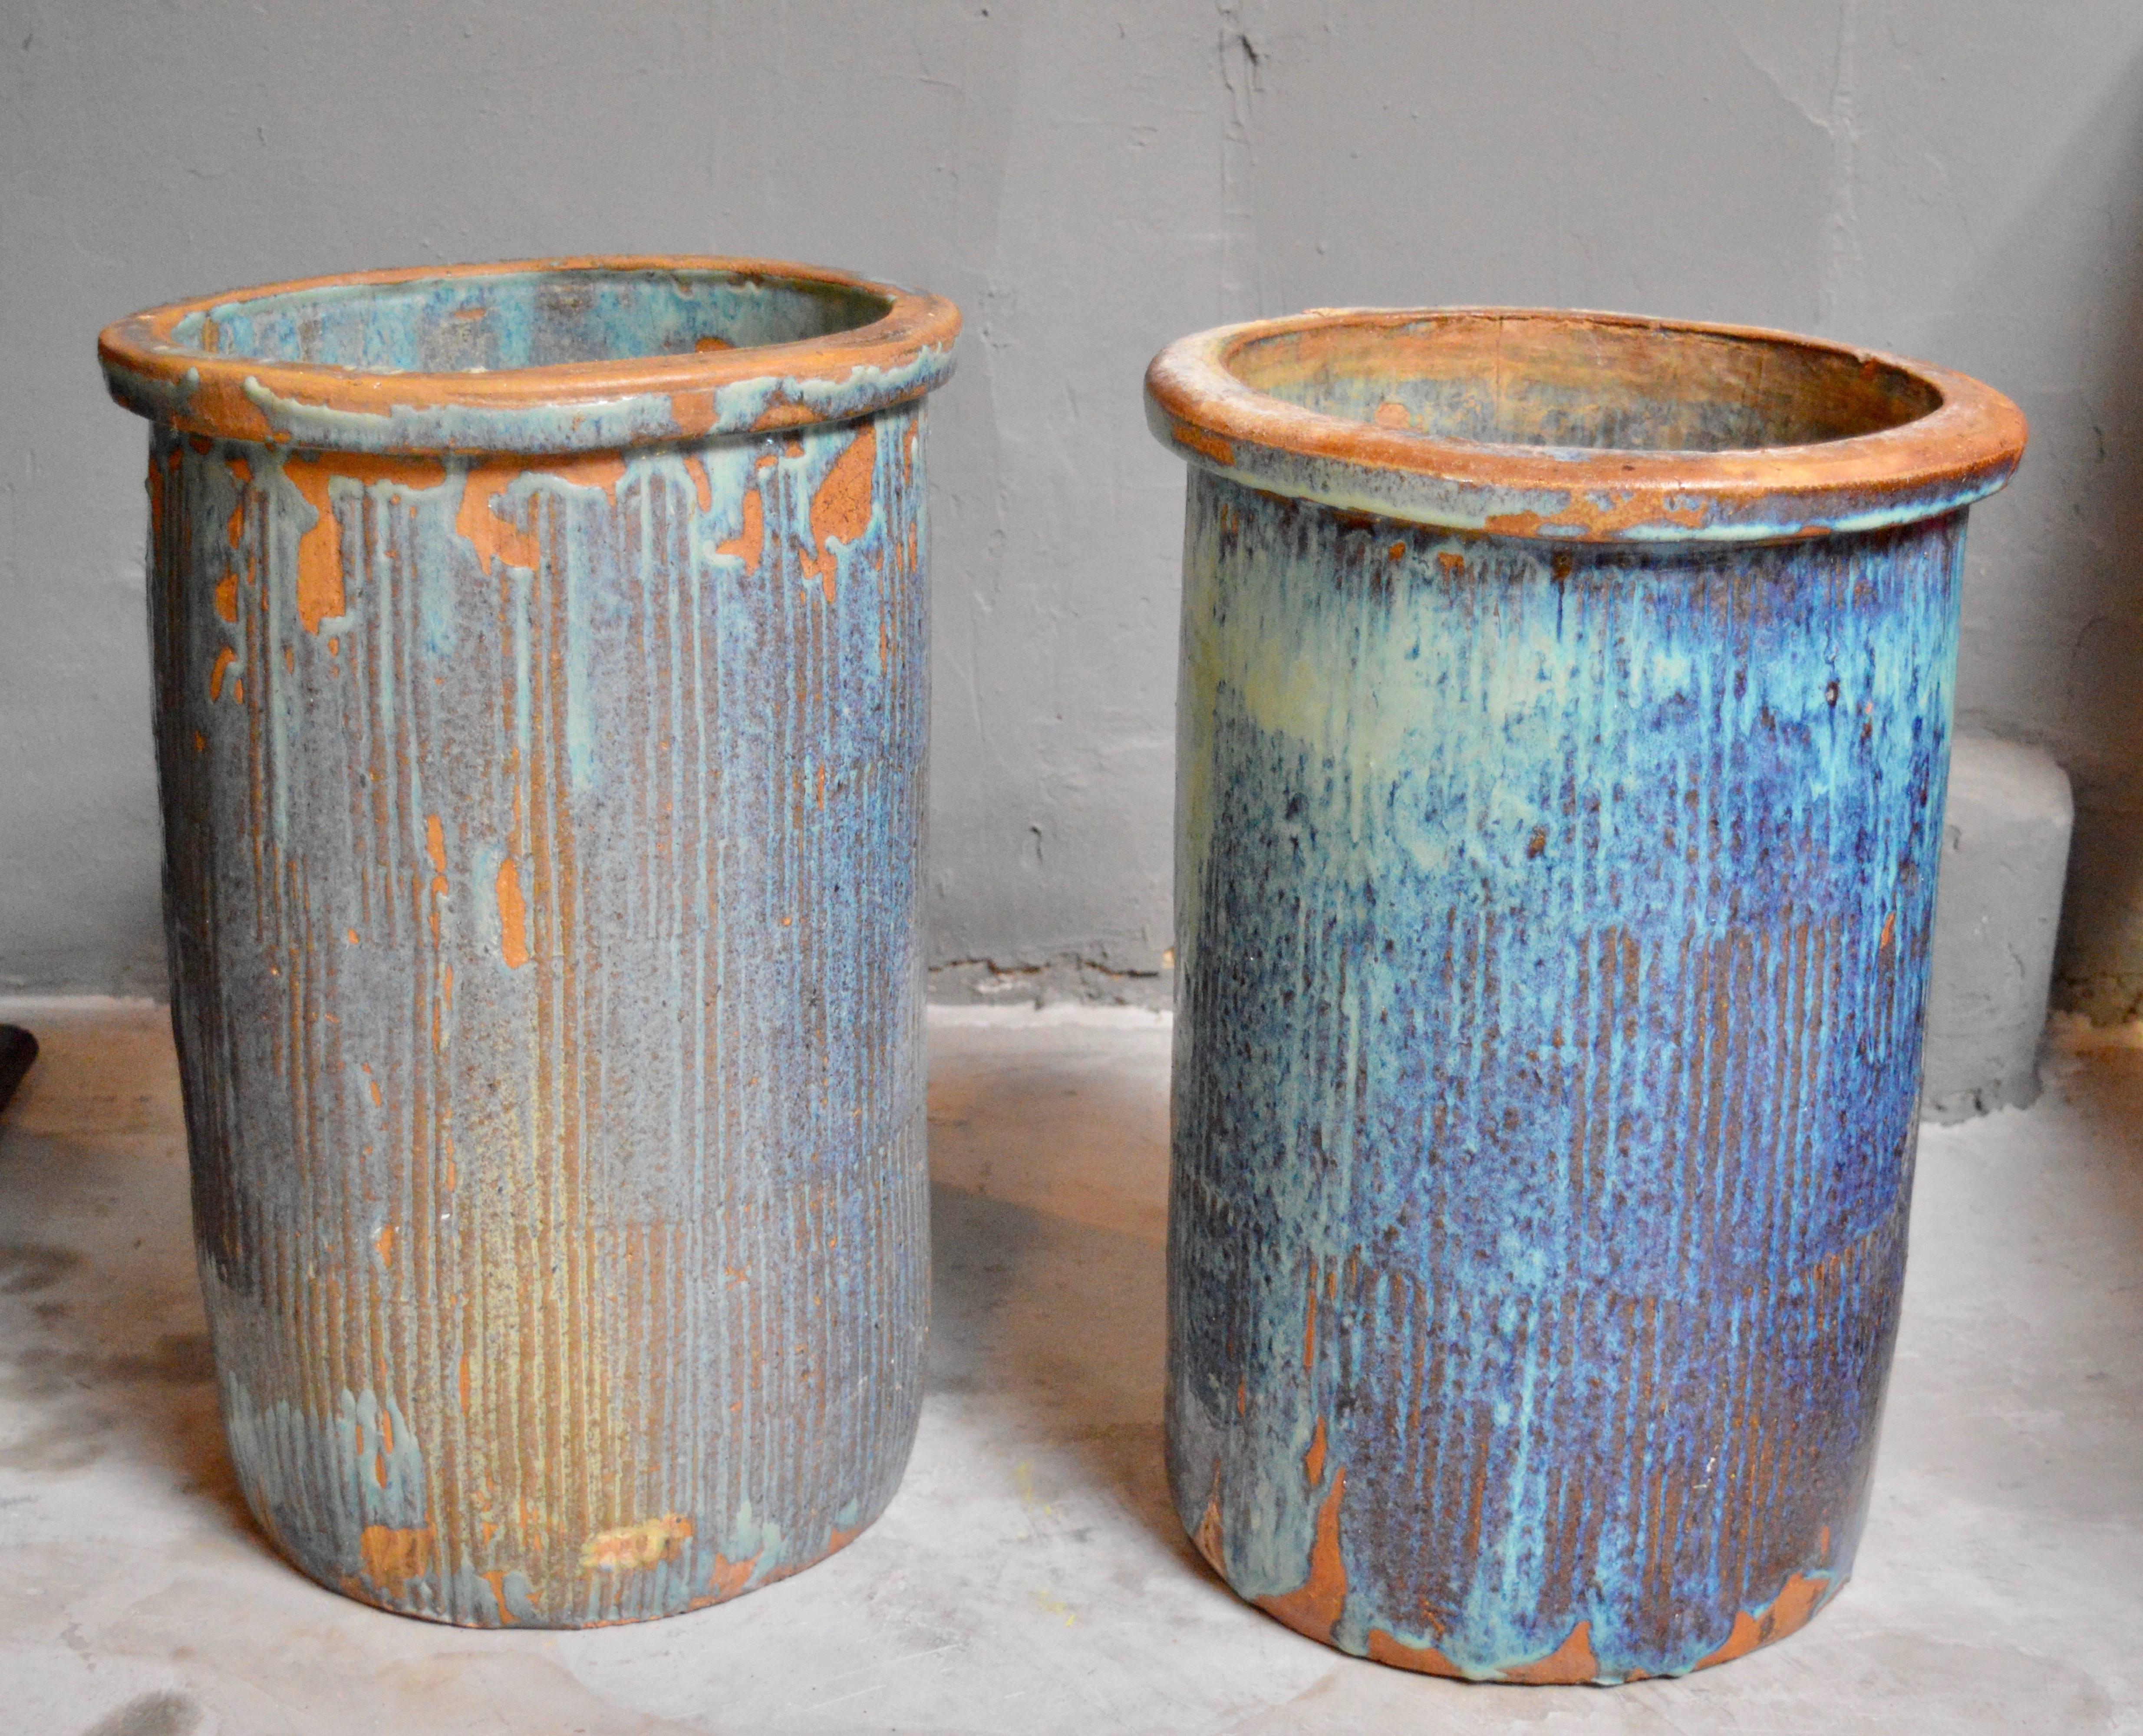 Fantastic pair of large drip glaze ceramic pots. Great blue coloring. Good vintage condition. Perfect for indoors or outside.